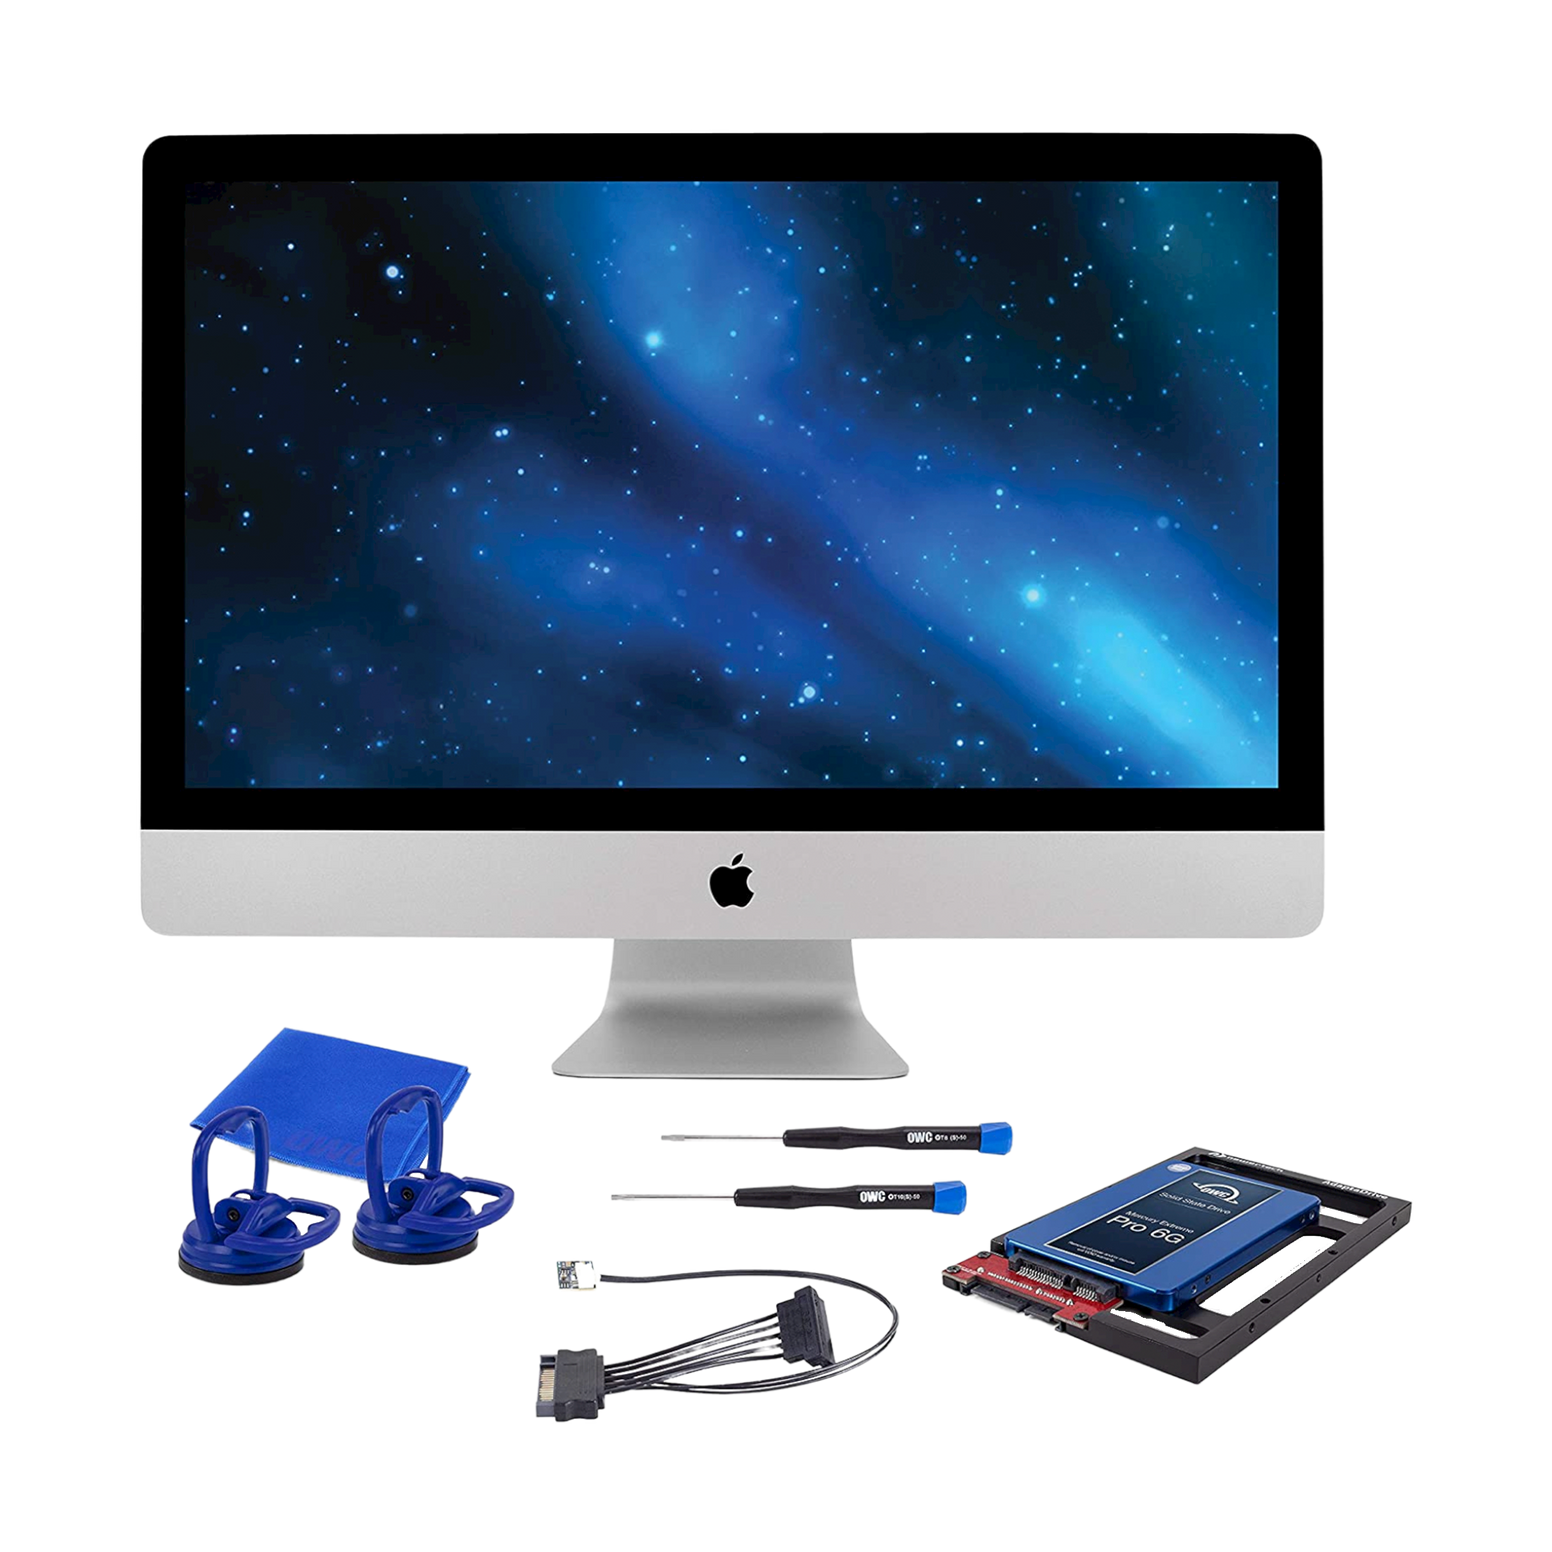 OWC 250GB 6G SSD and HDD DIY Bundle Kit (for all 2011 iMacs)